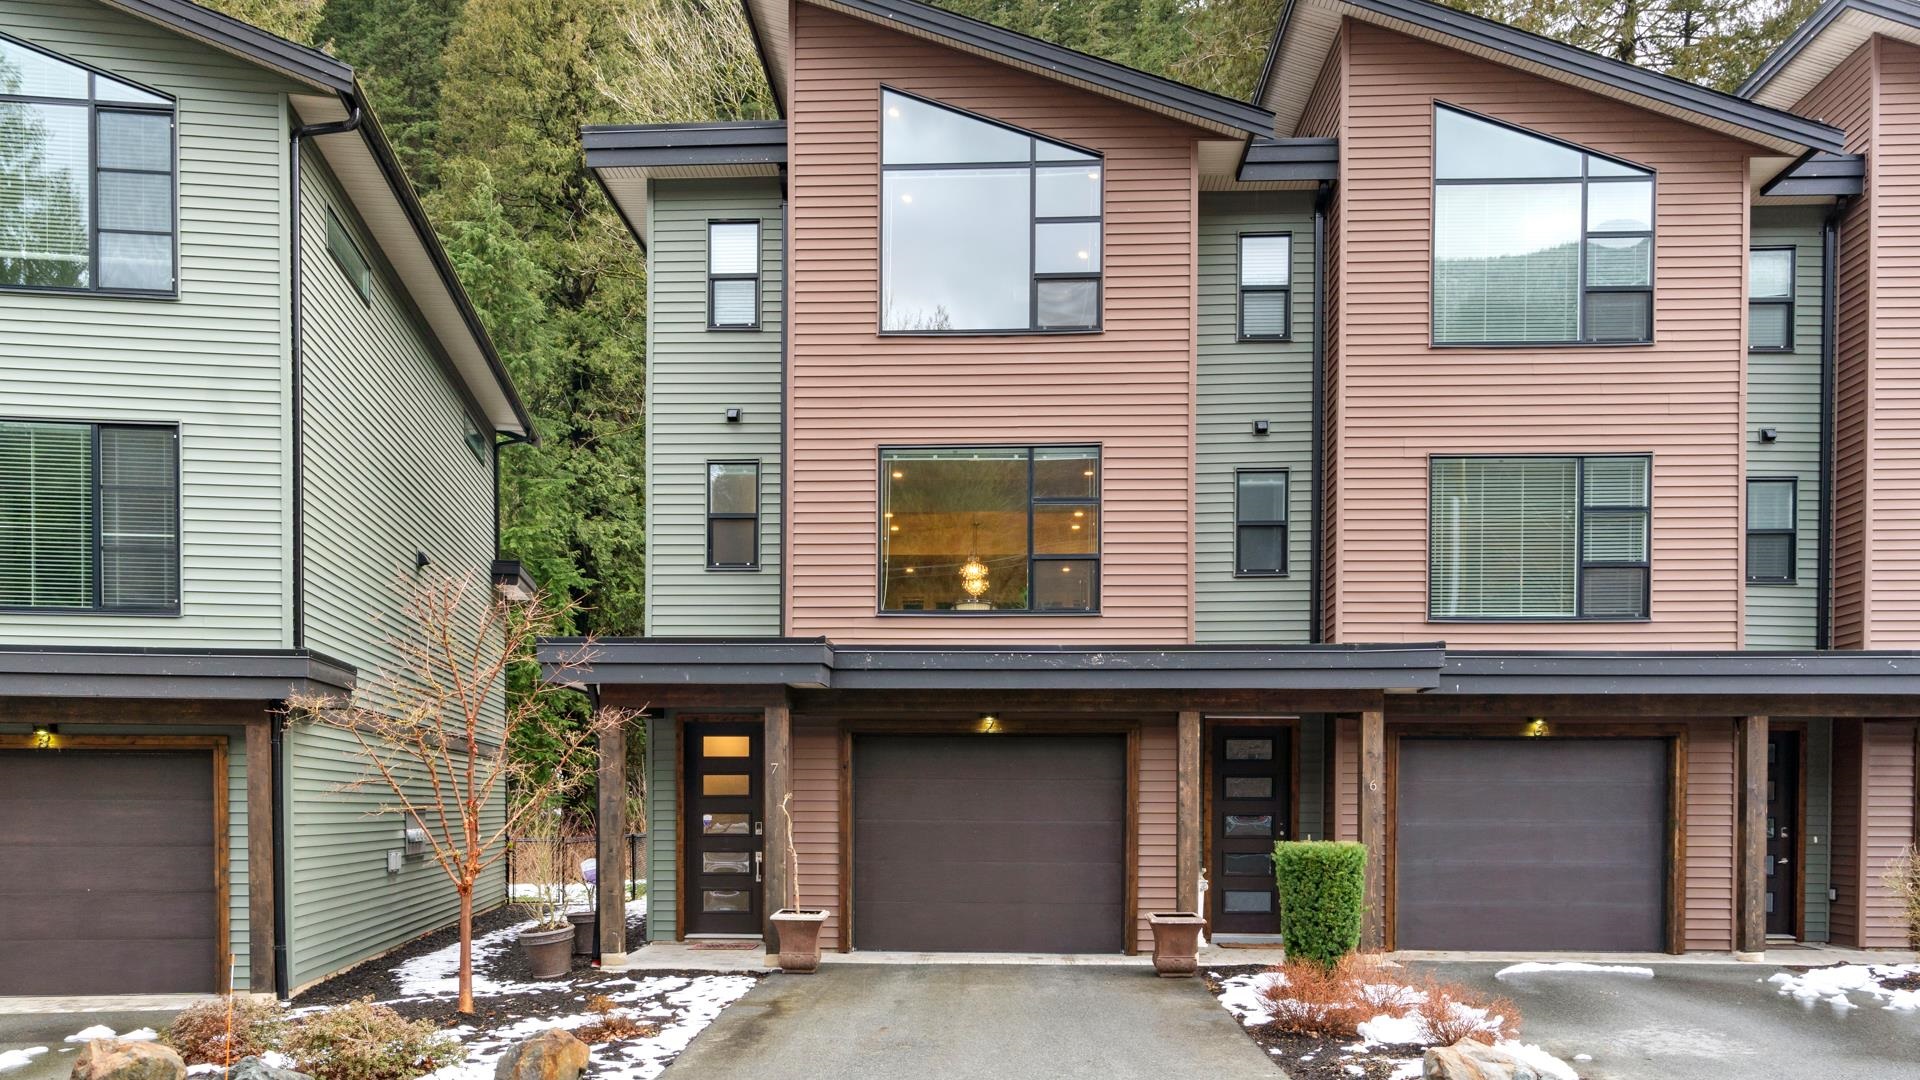 Harrison Hot Springs Townhouse for sale:  2 bedroom 1,785 sq.ft. (Listed 2106-02-06)